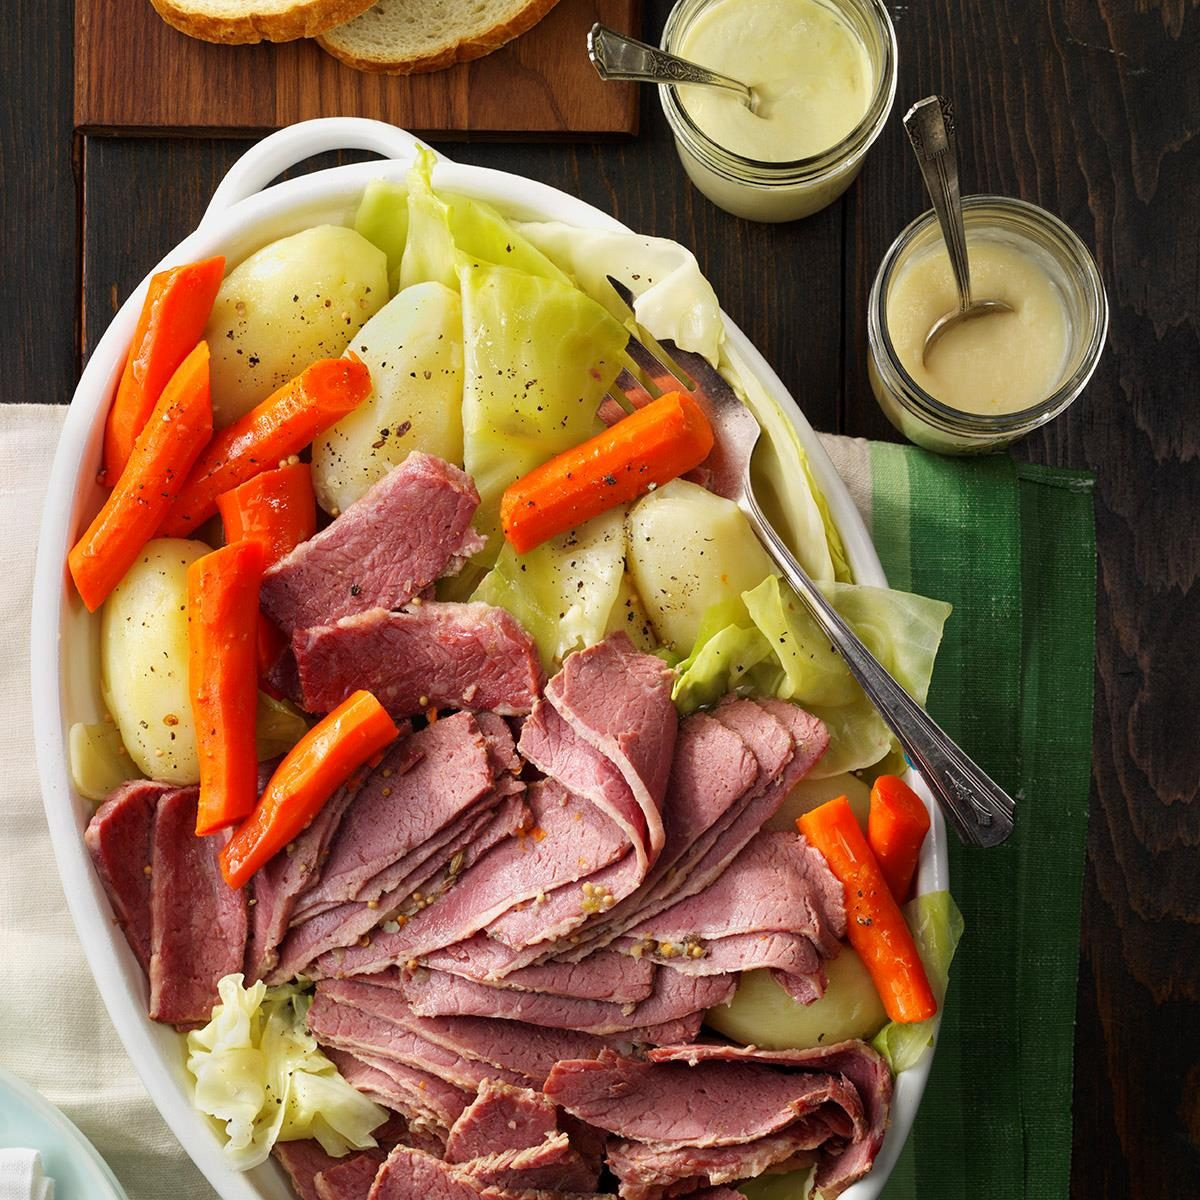 Corned Beef And Cabbage Irish
 Favorite Corned Beef and Cabbage Recipe